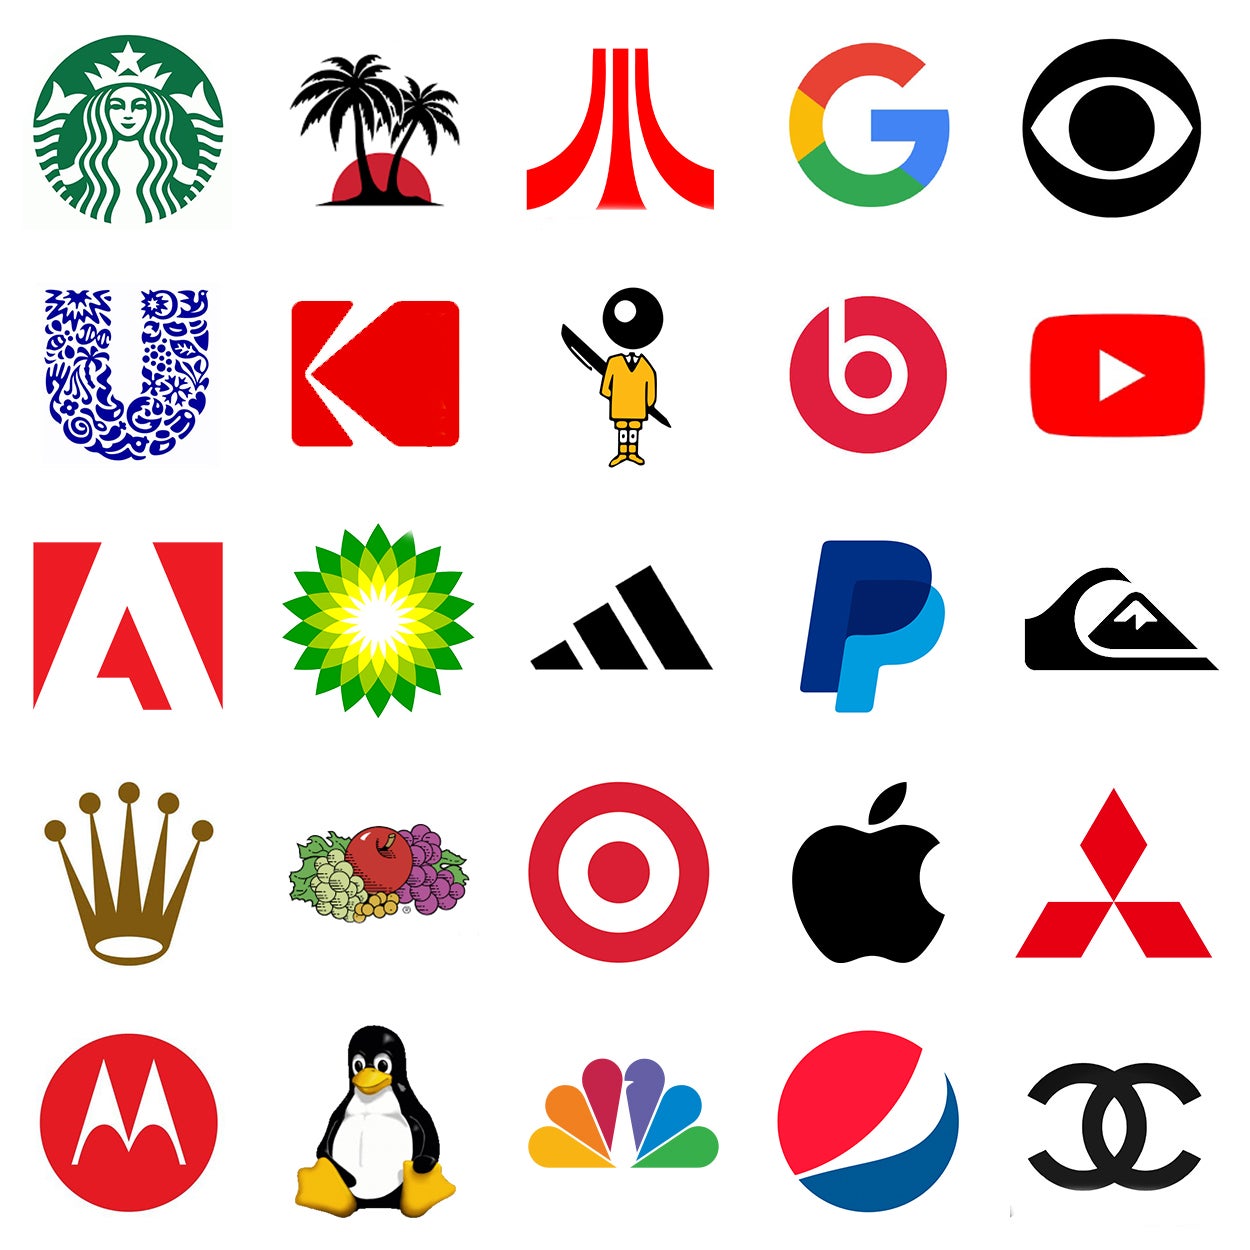 Most People Identify 12 Of These Logos — Can You?